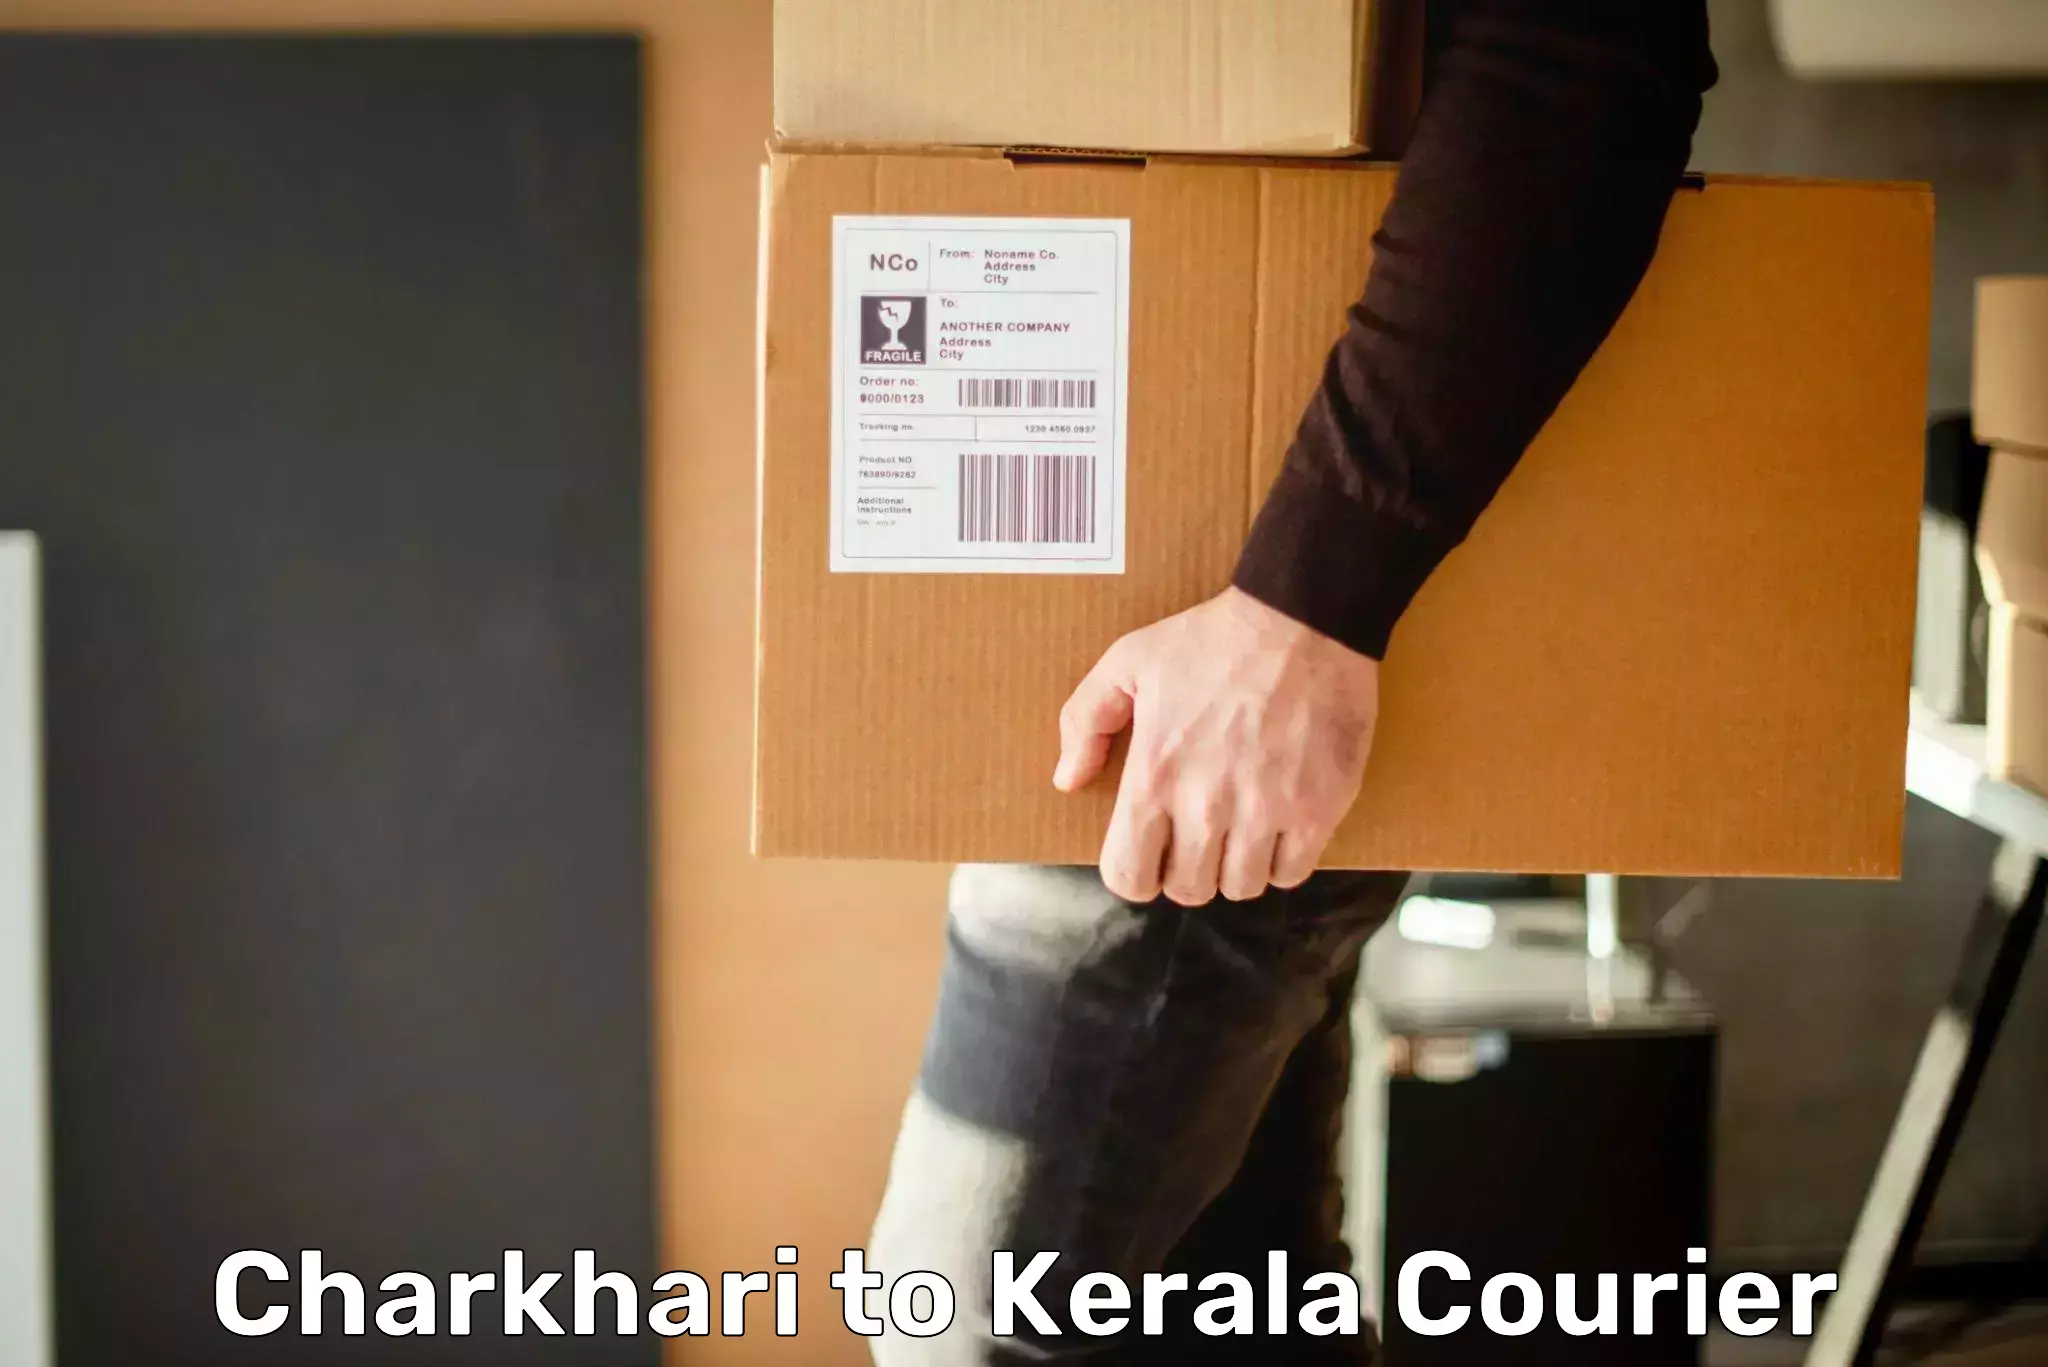 State-of-the-art courier technology Charkhari to Kerala